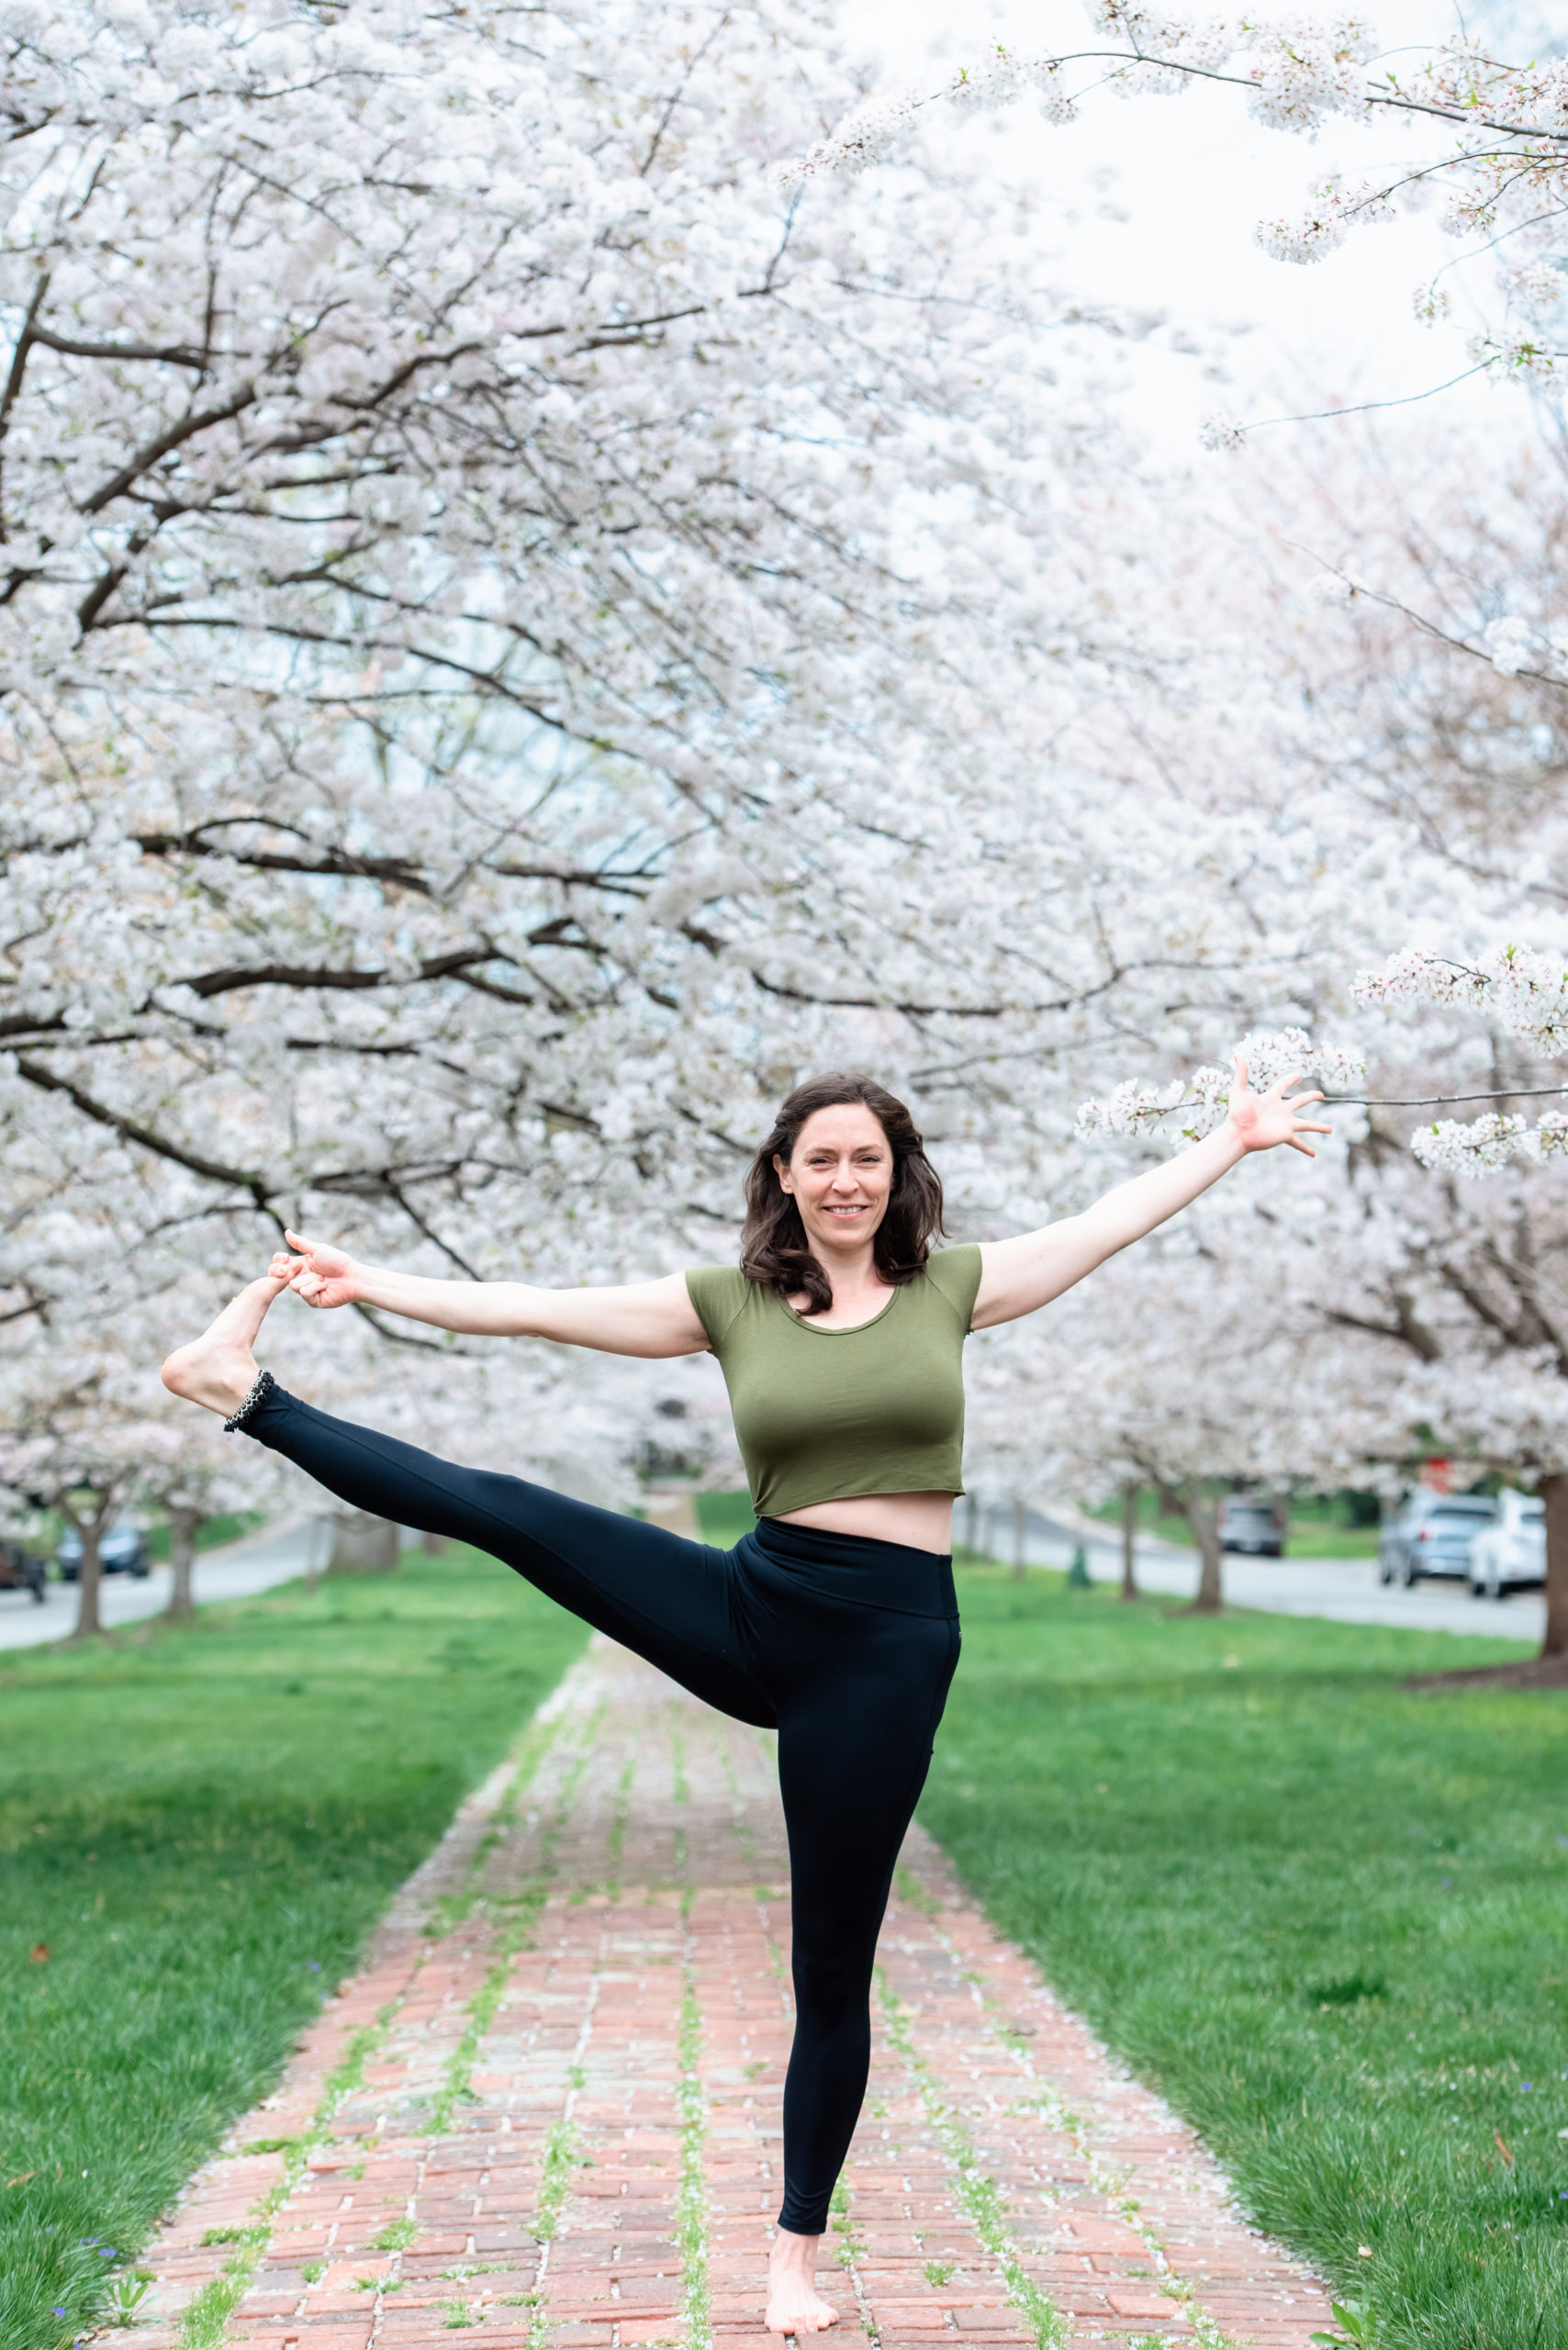 Corinne, Yogi extraordinaire, mediates with her eyes closed in a yoga position under a sea of pale pink cherry blossoms during her Richmond Spring Mini Session with EmmiClaire Photography.